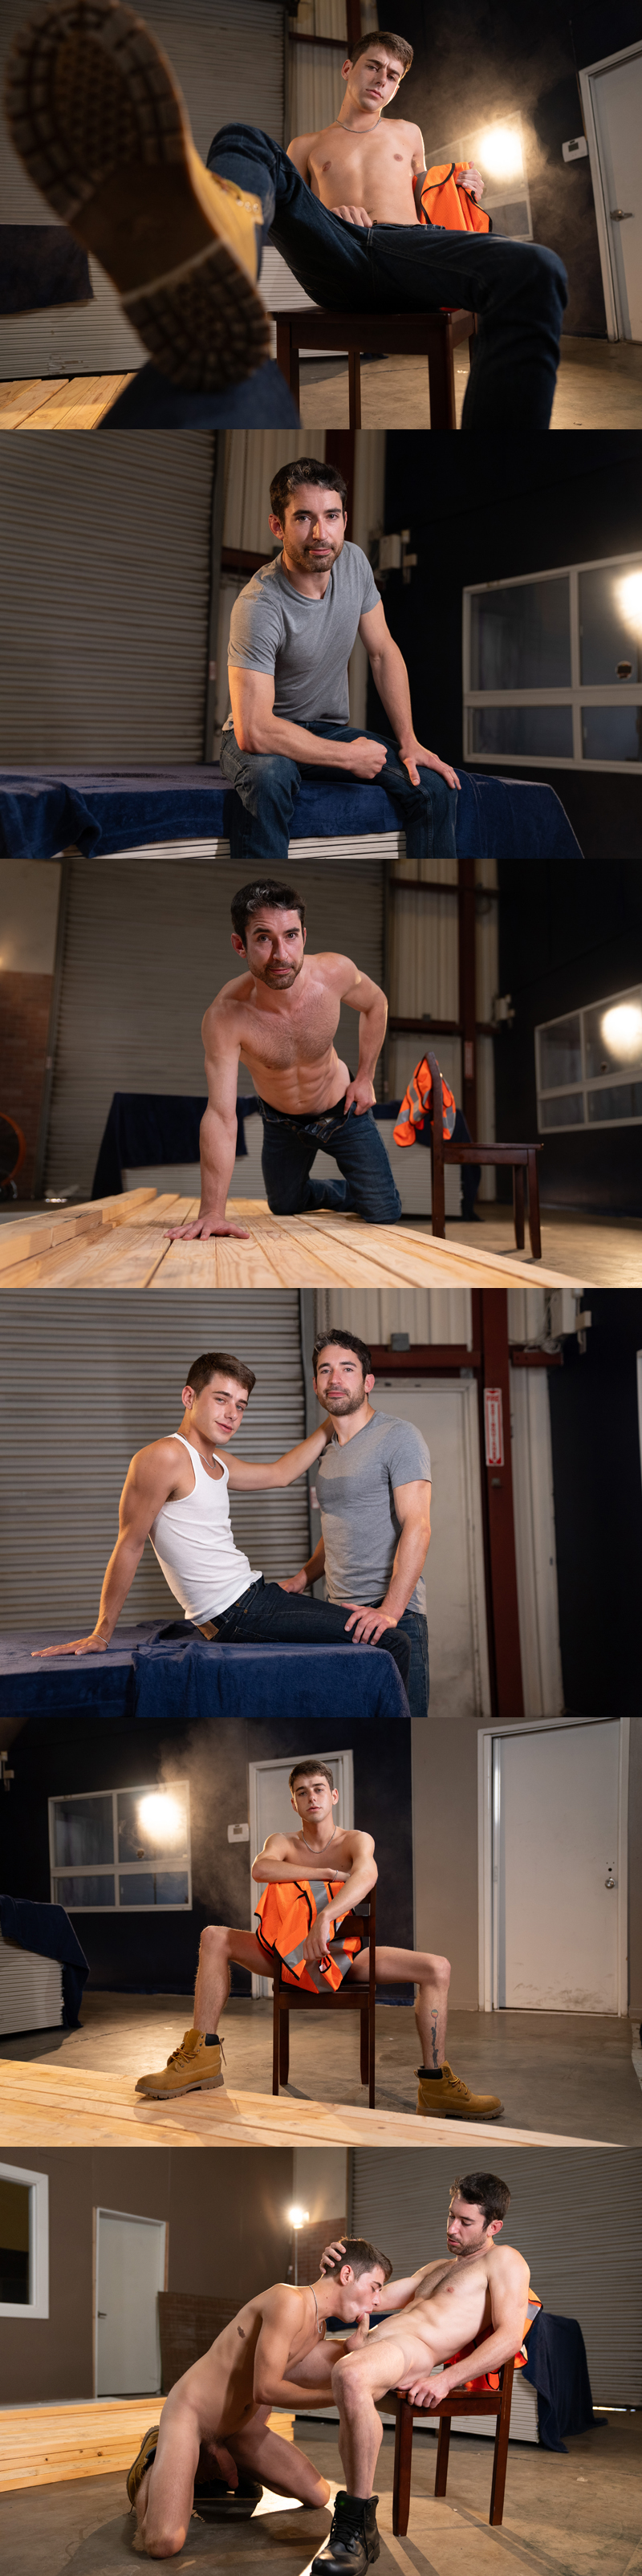 Joey Mills Helps Jay Stroke Take The Edge Off at MEN.com